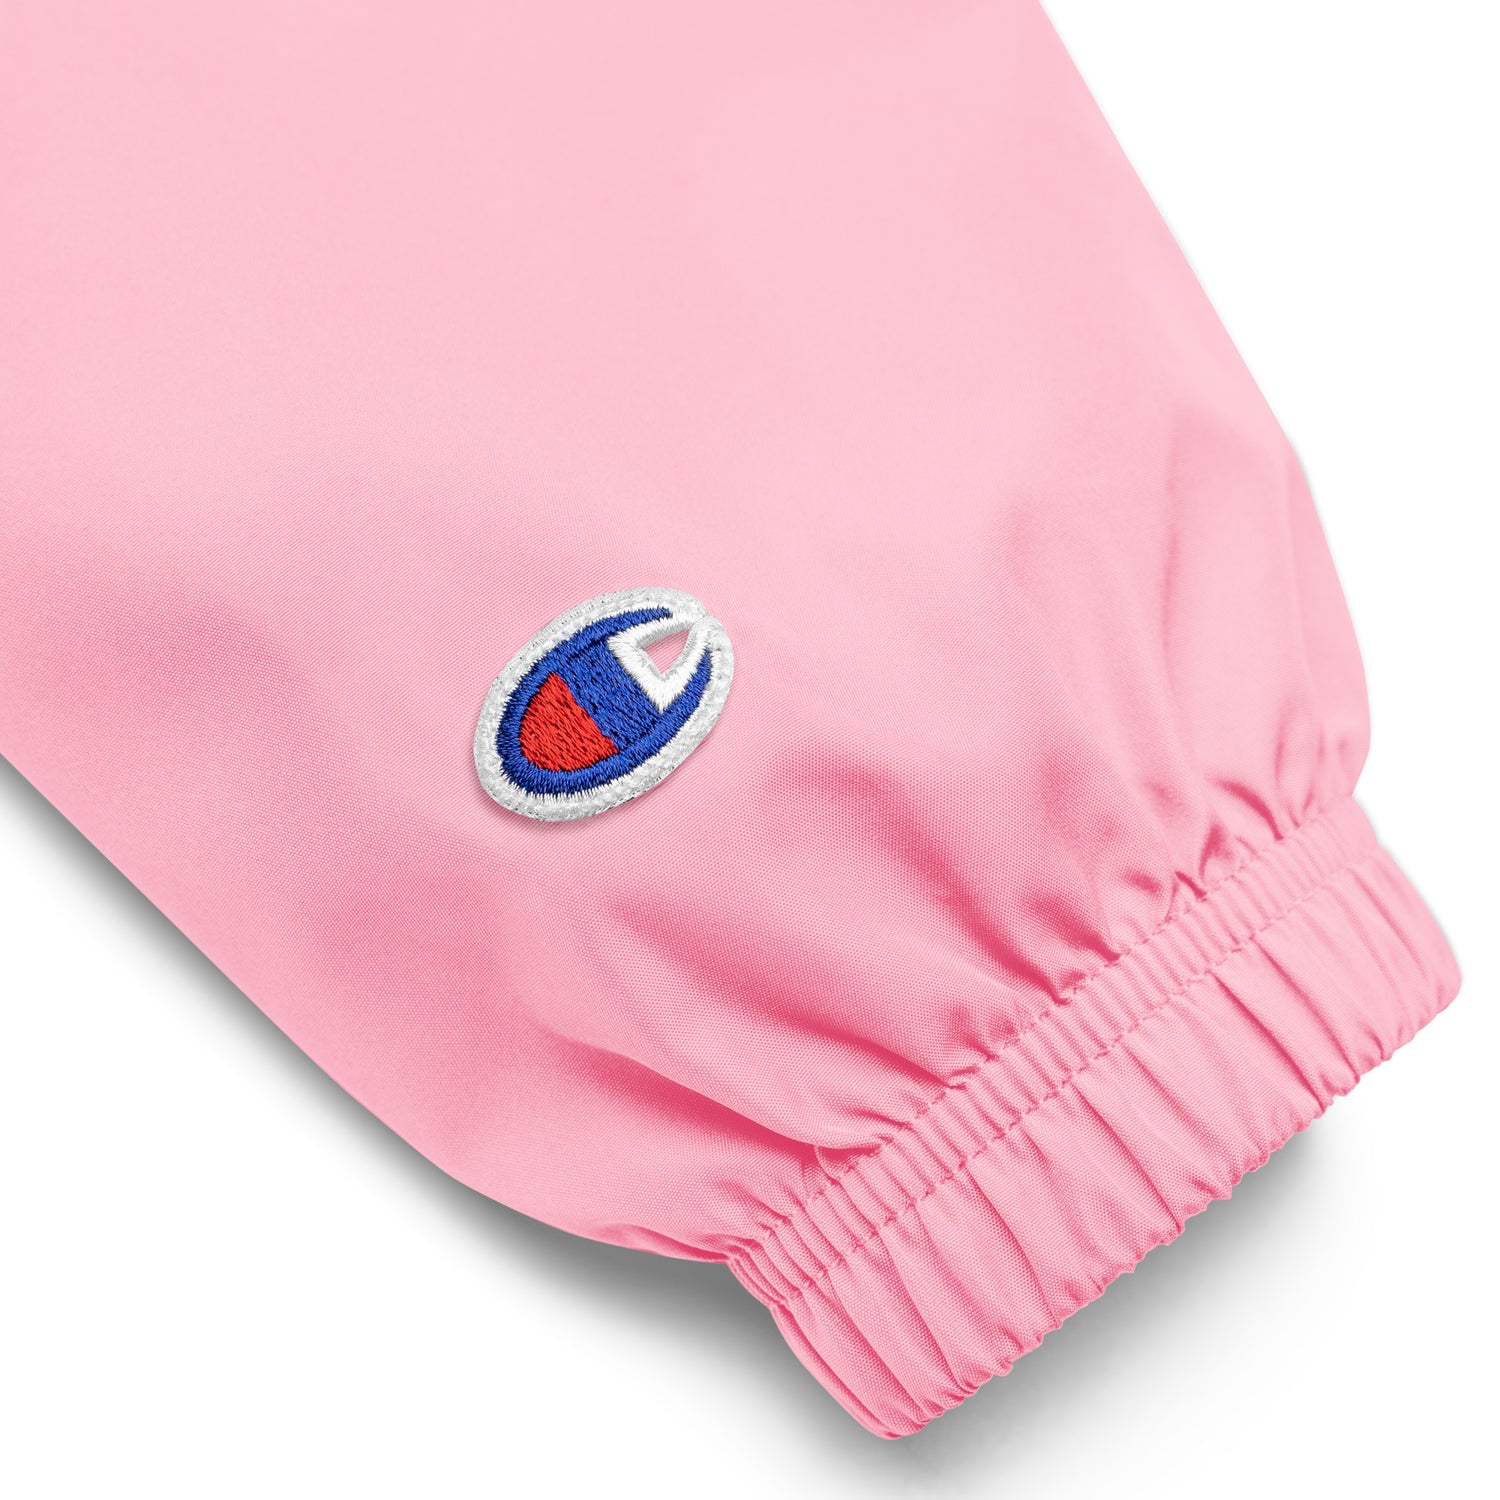 Women's “Lax World x Champion” Cradle Multi-shaded Packable Lacrosse Jacket - Pink Top of the hand 